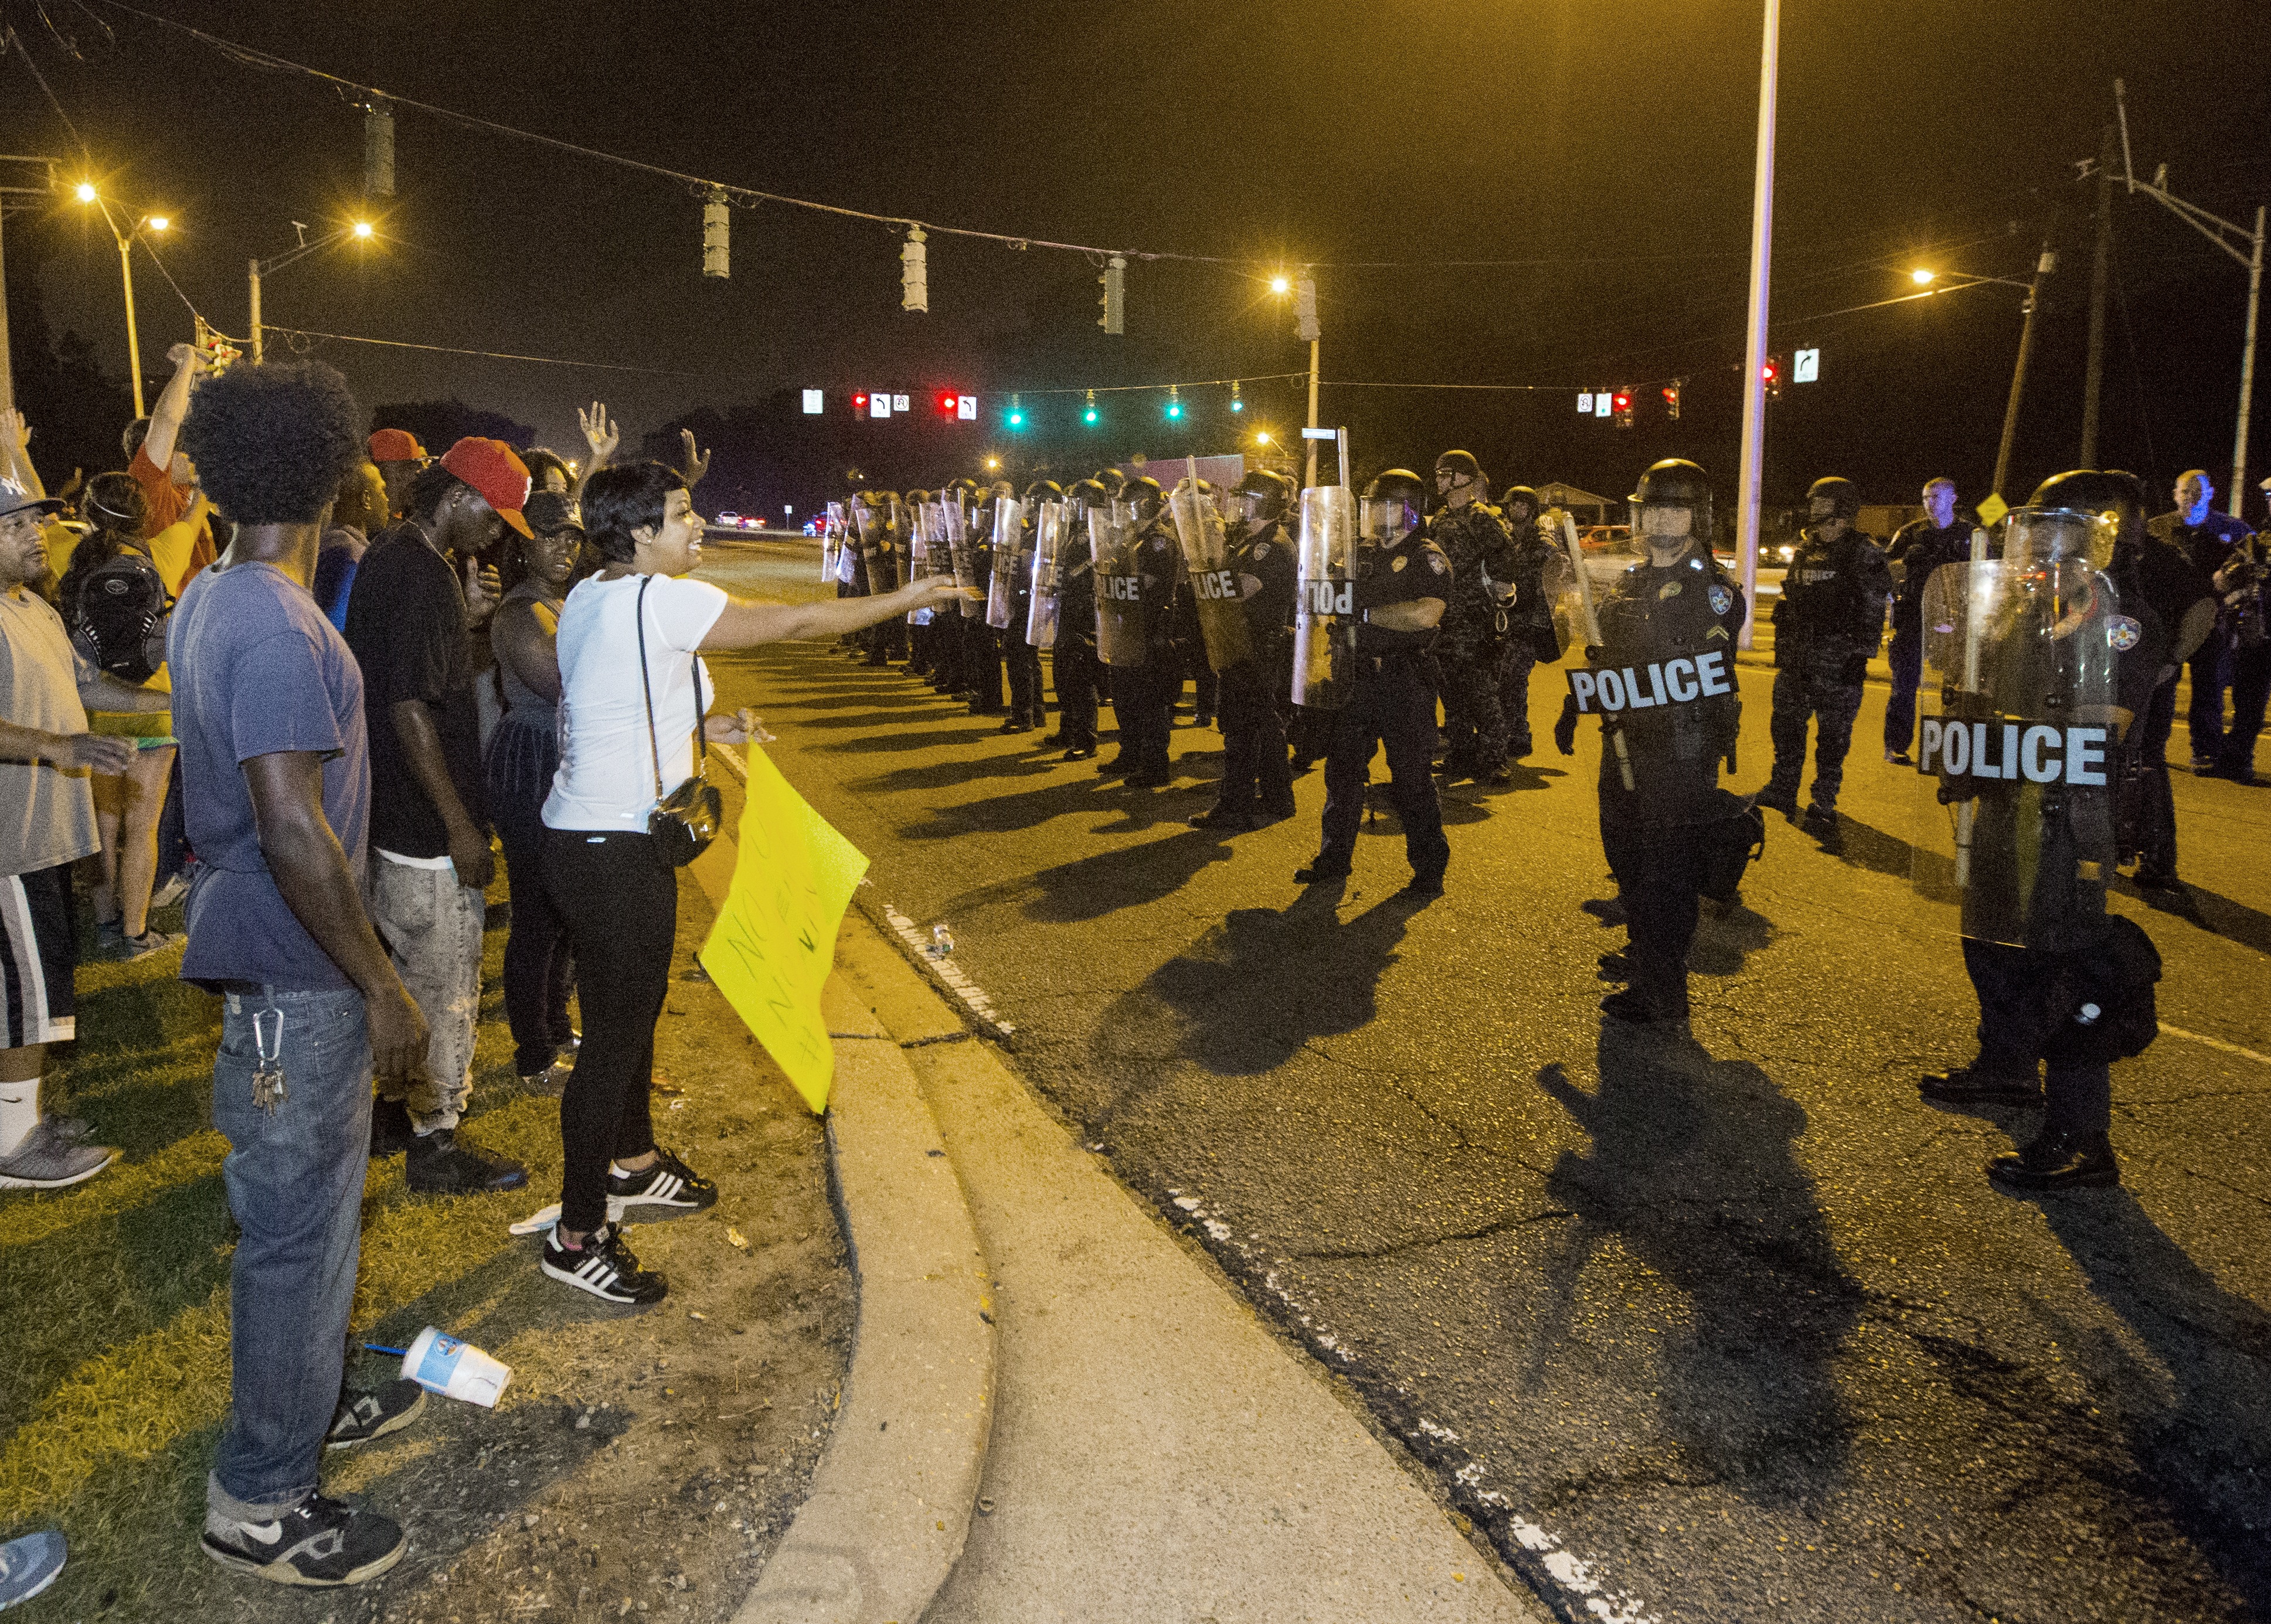 People gather to protest against the shooting of Alton Sterling on July 10, 2016 in Baton Rouge, Louisiana. (Mark Wallheiser—Getty Images)